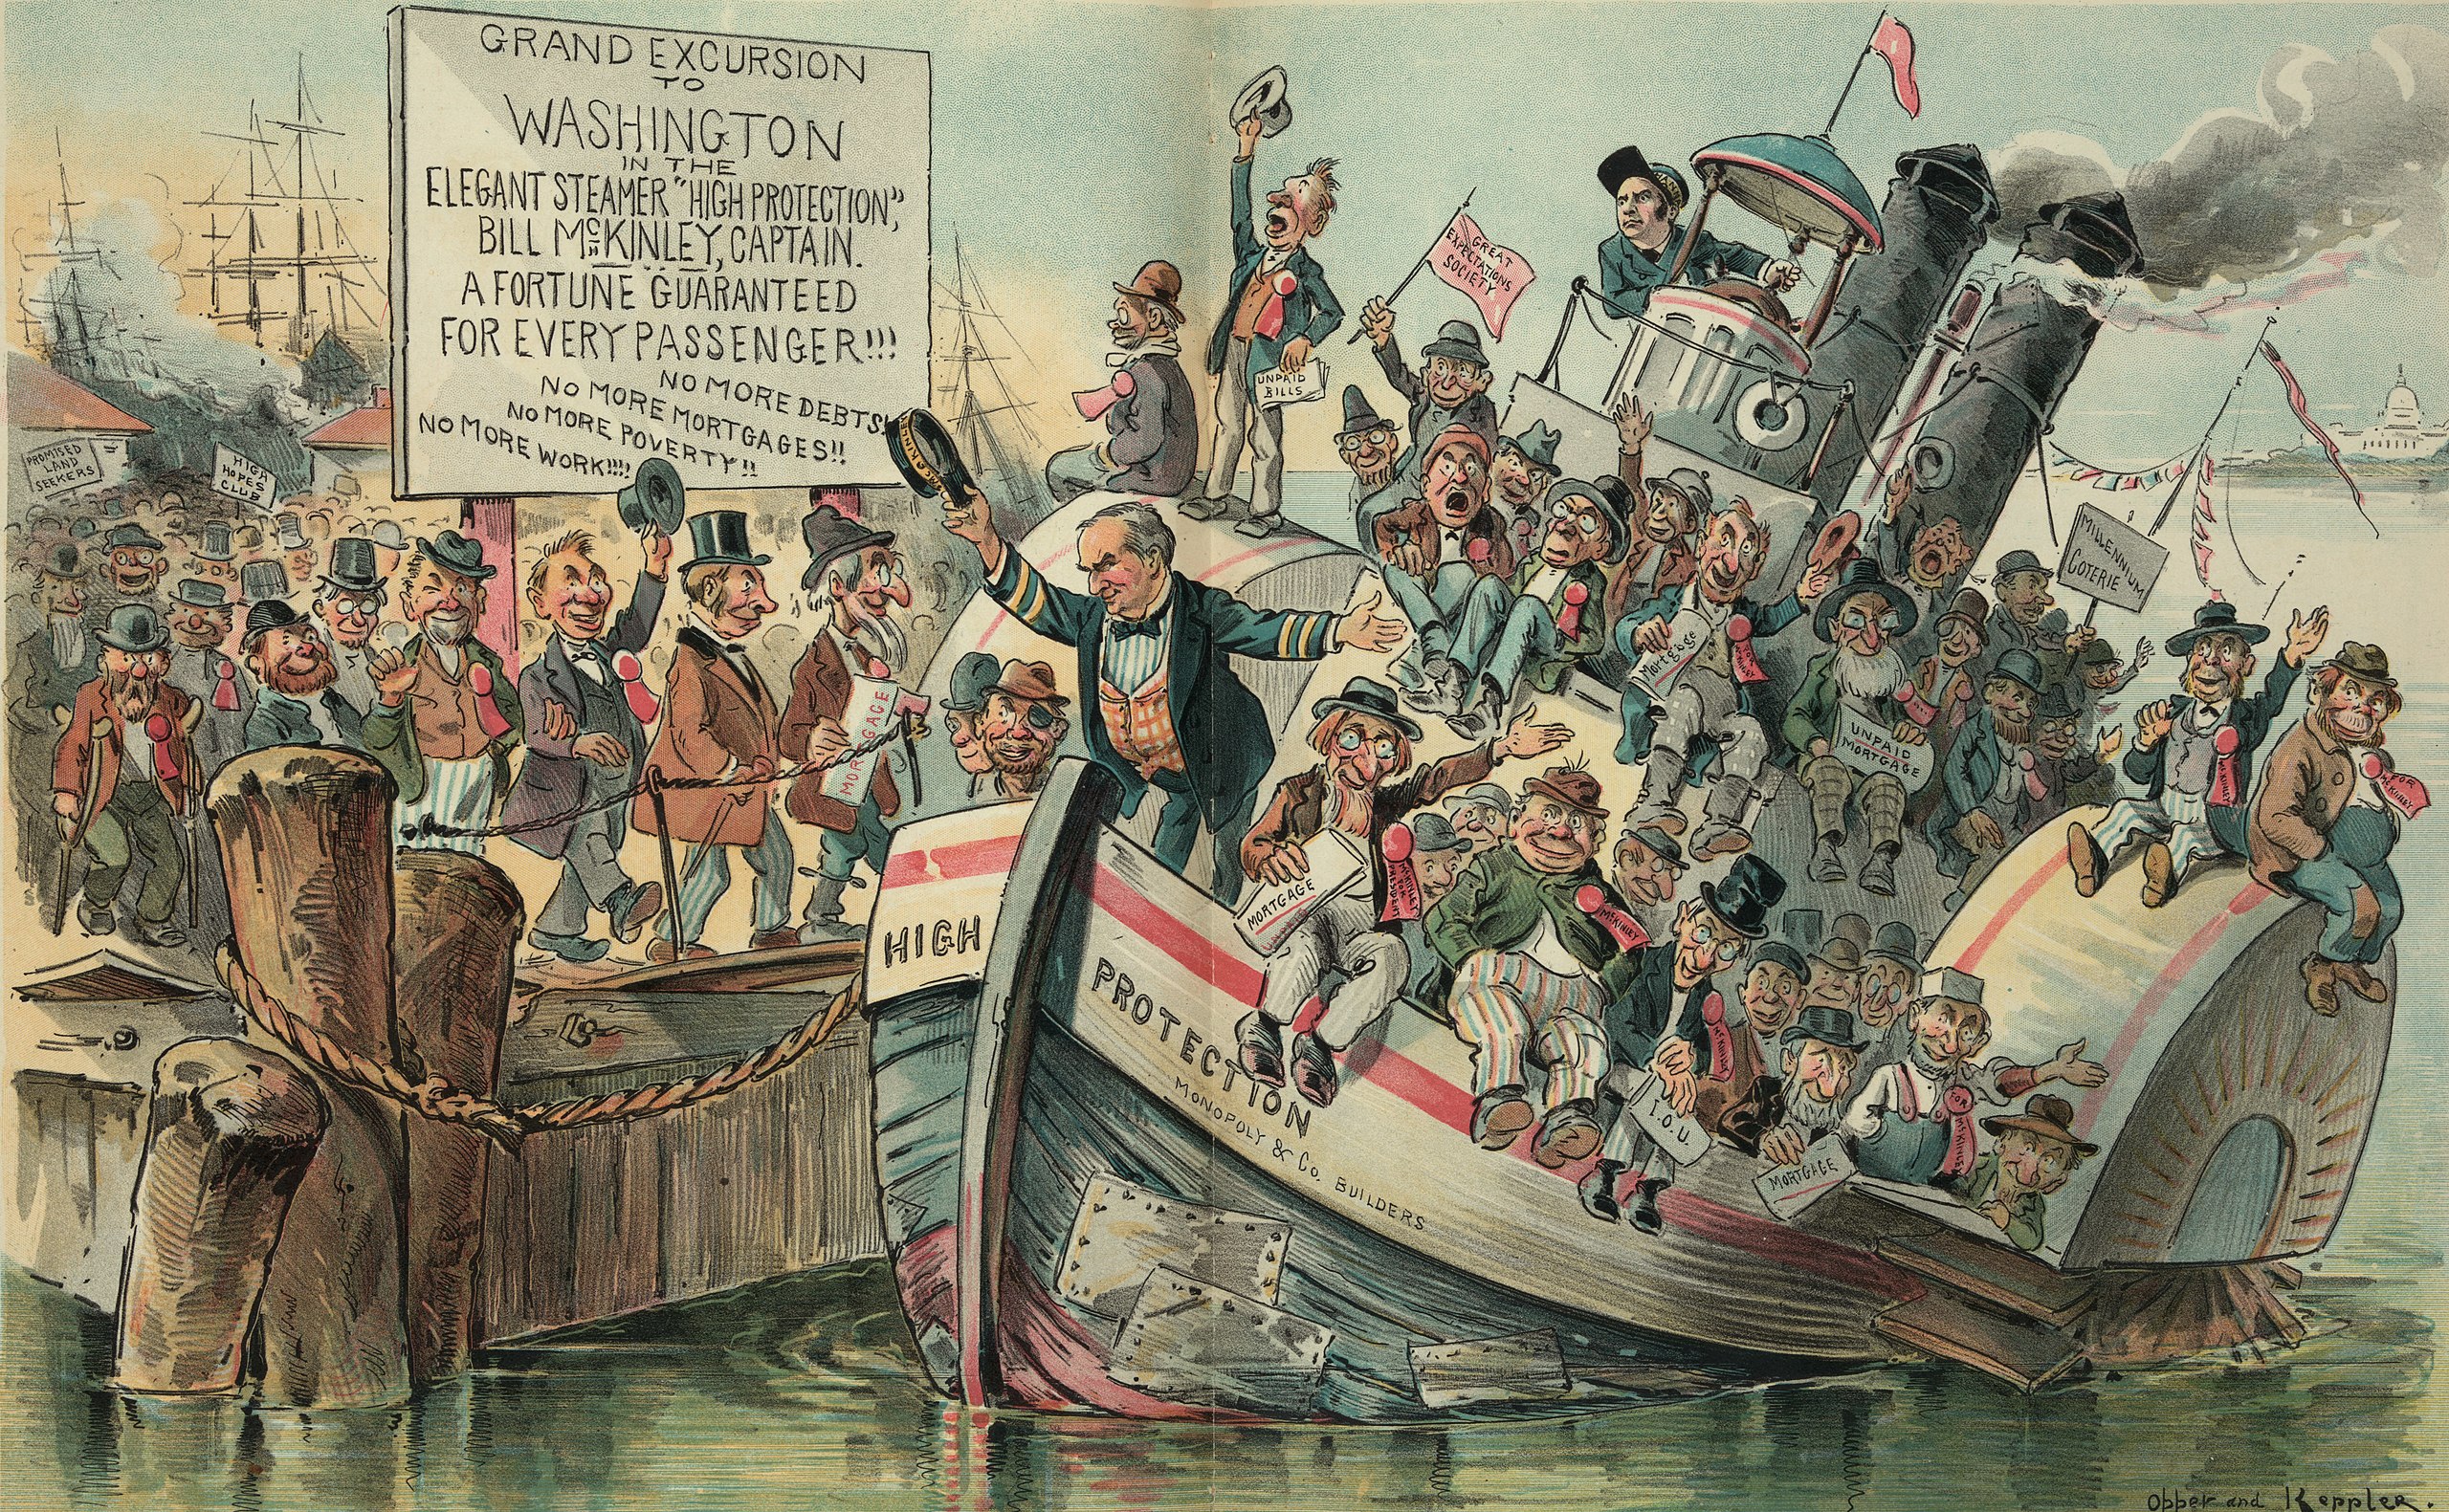 A cartoon depicting a boat engaged in free trade with people on board.